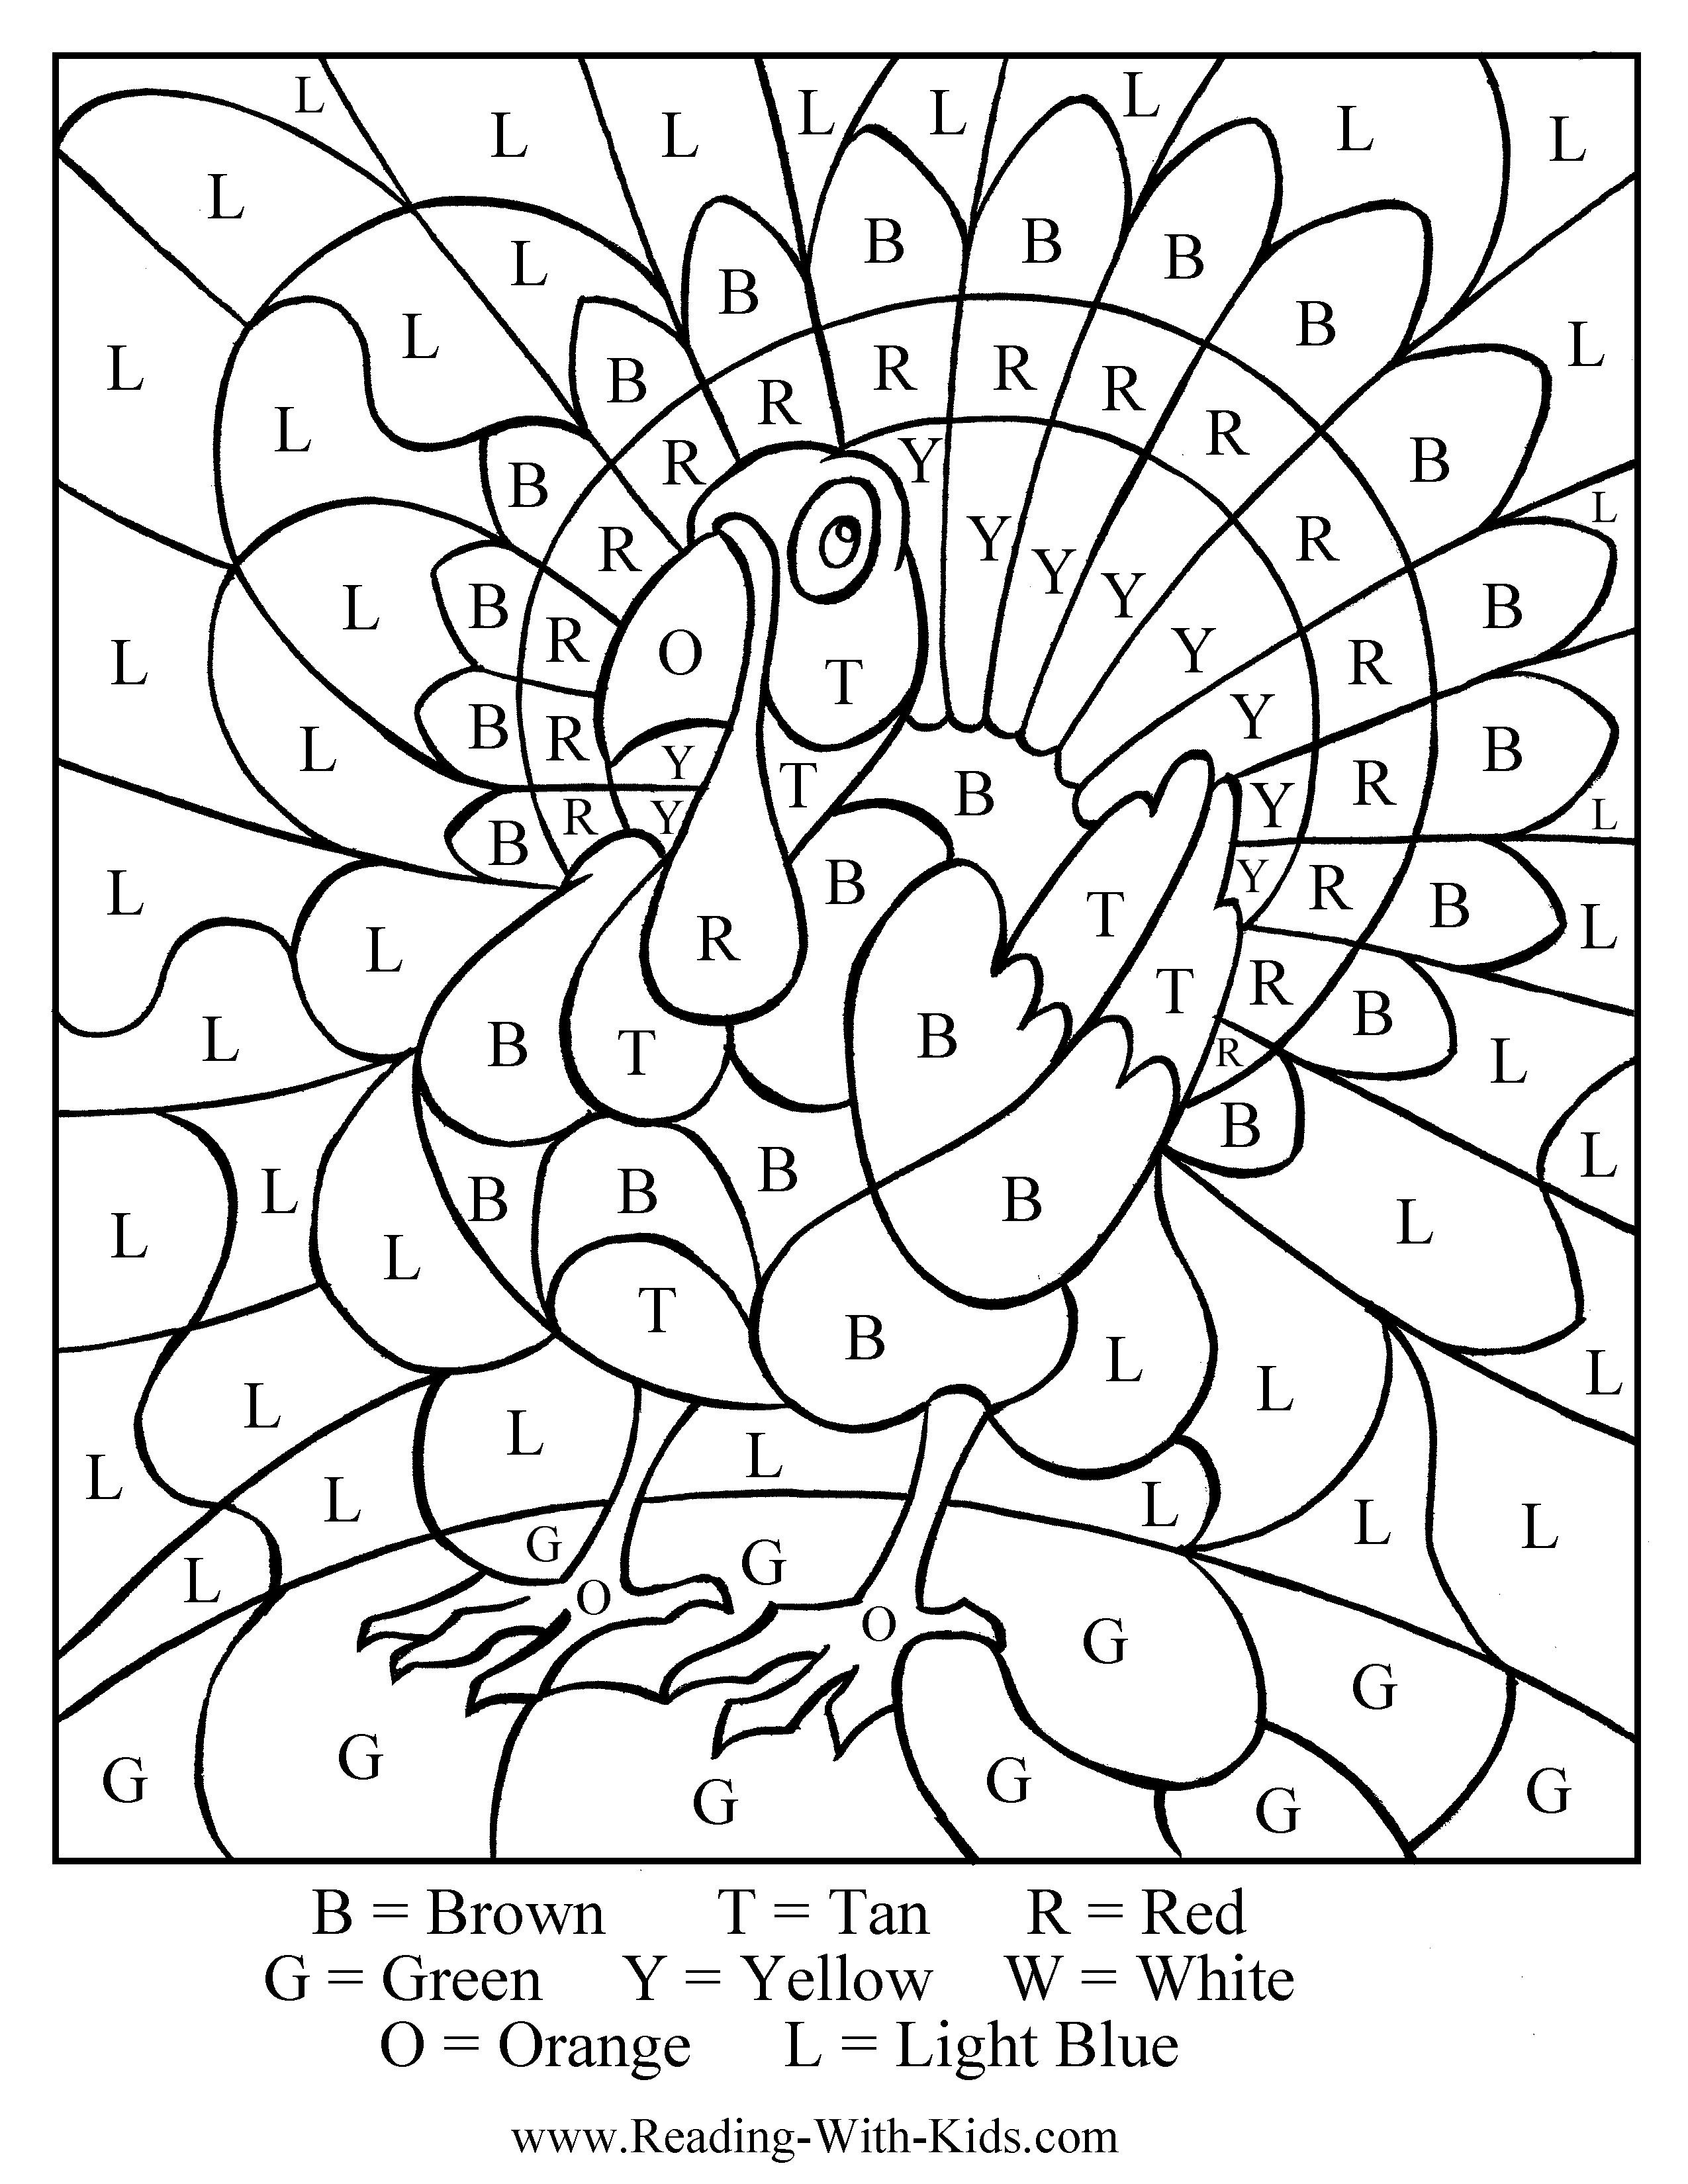 Printable Thanksgiving Worksheets For Middle School